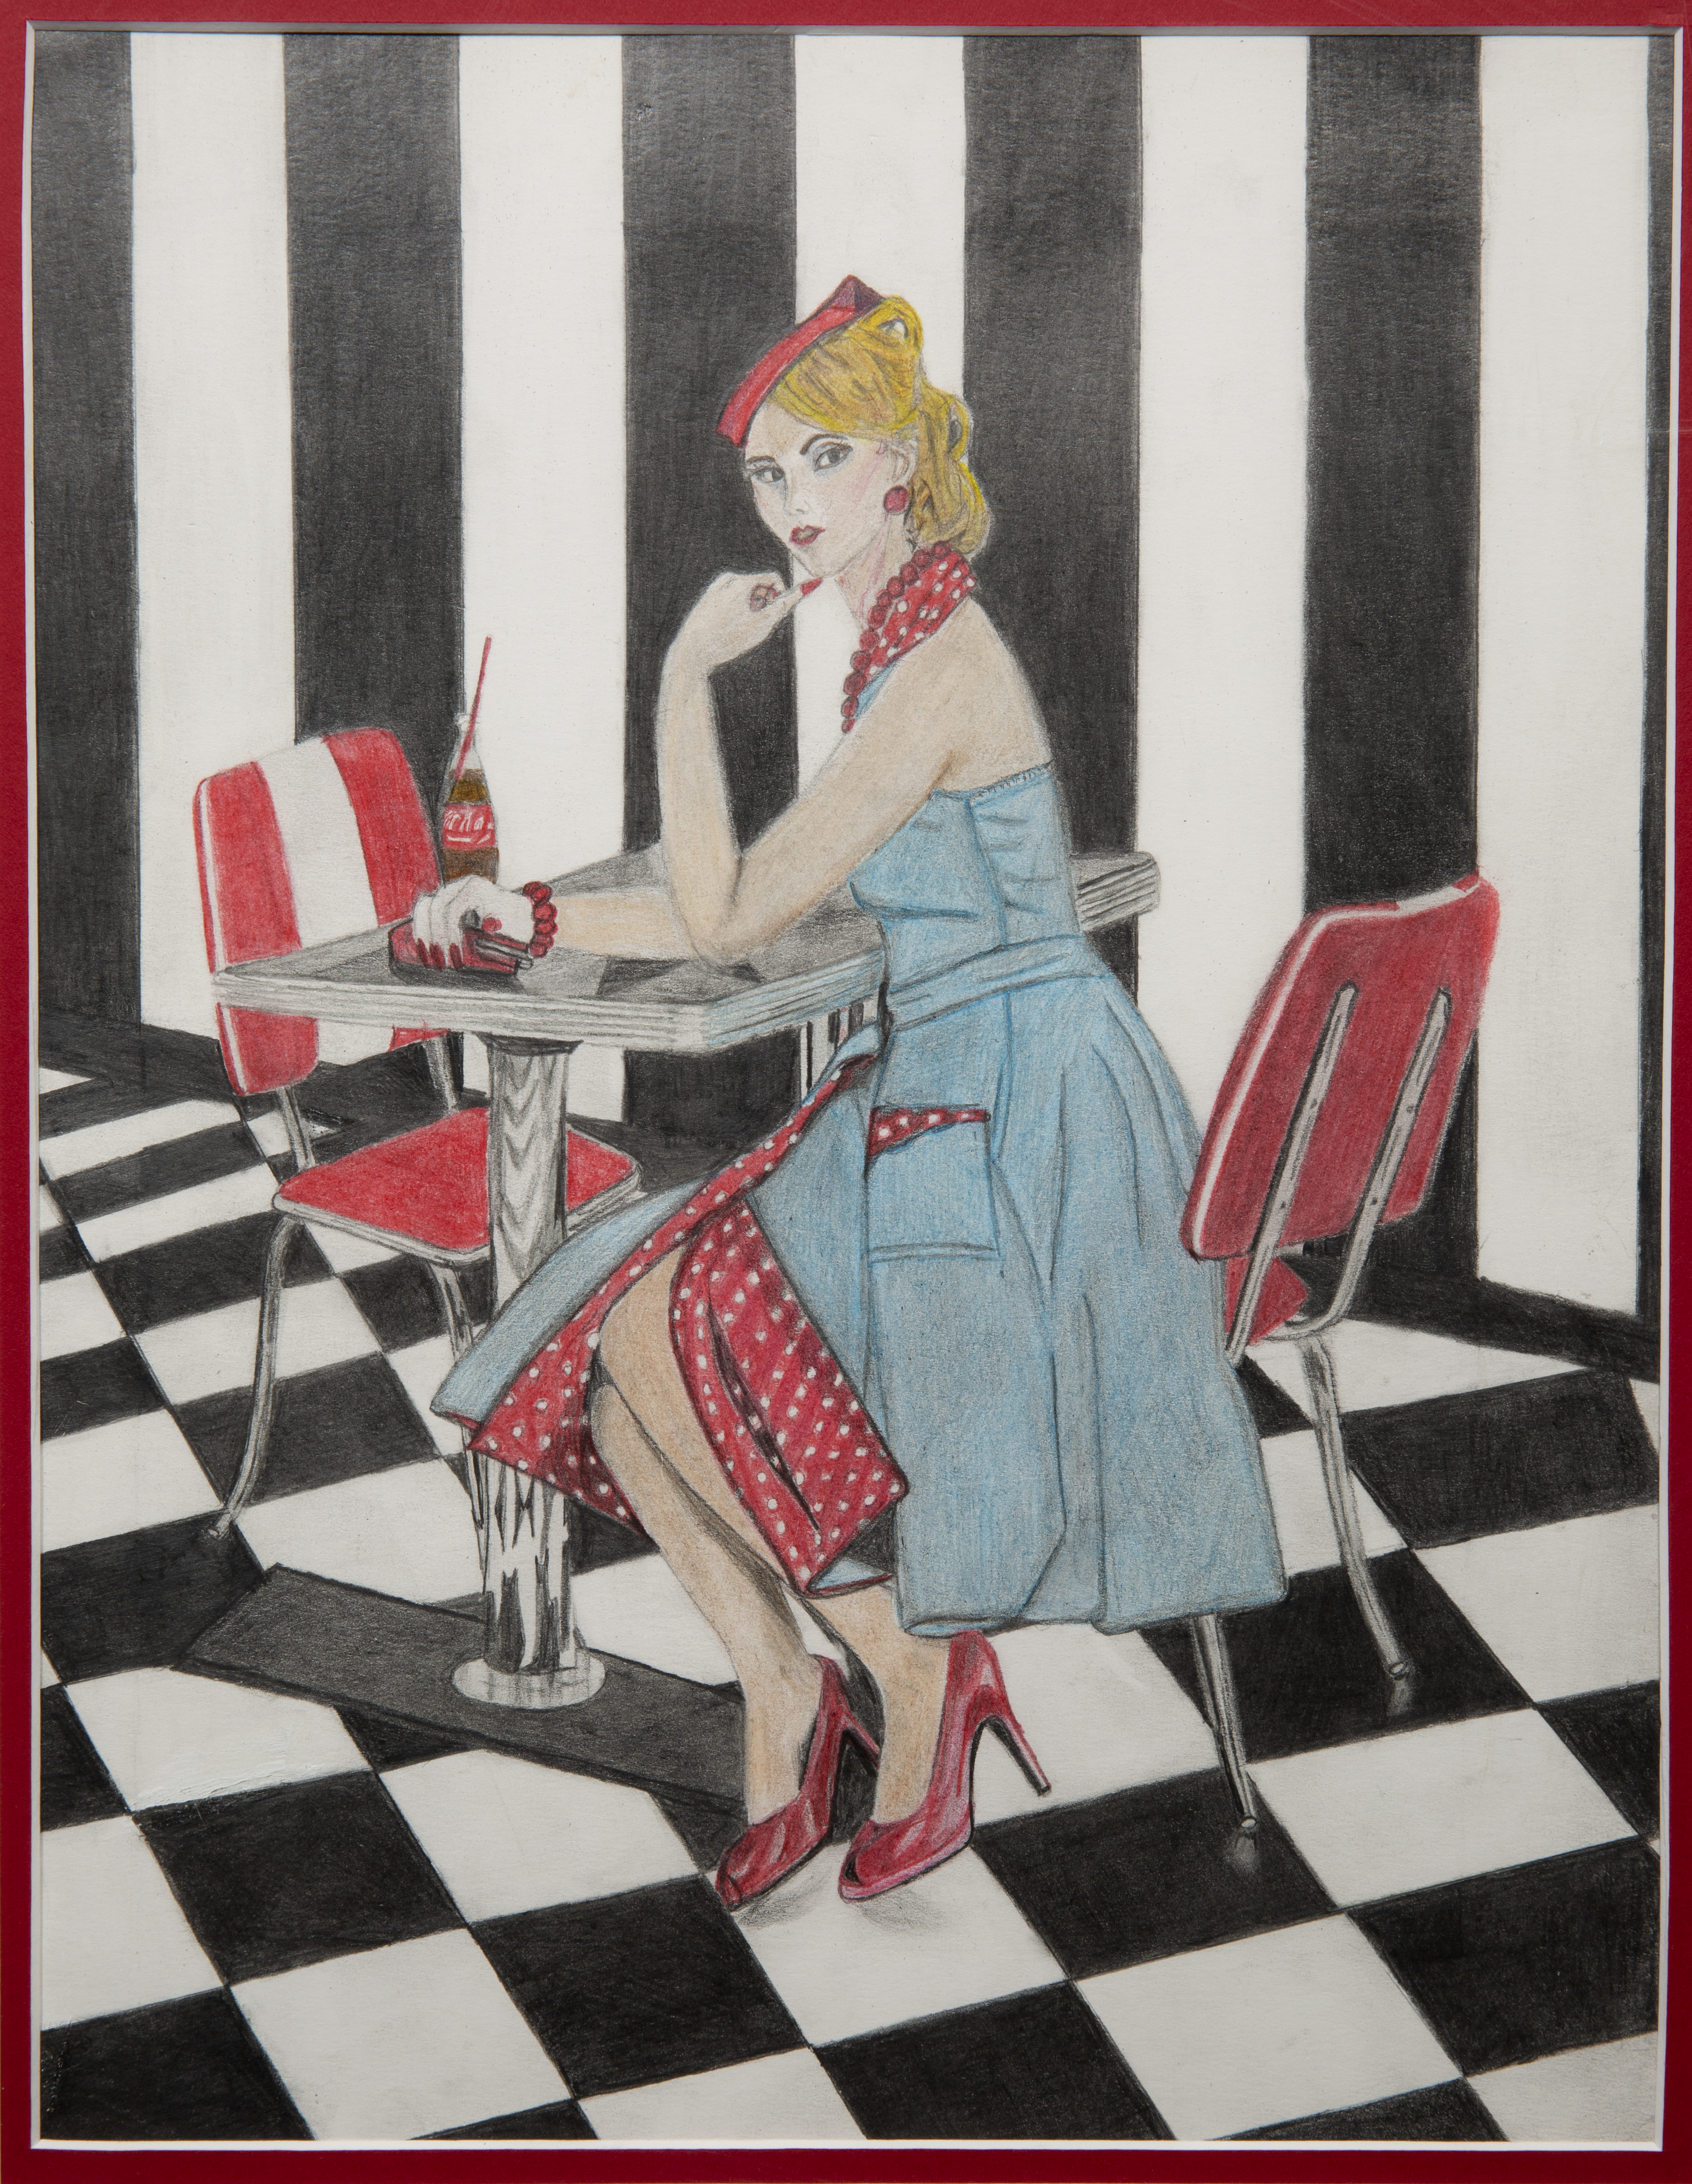 Drawing - Love Waits - Drawing in color of woman sitting at a table in a fifties style diner